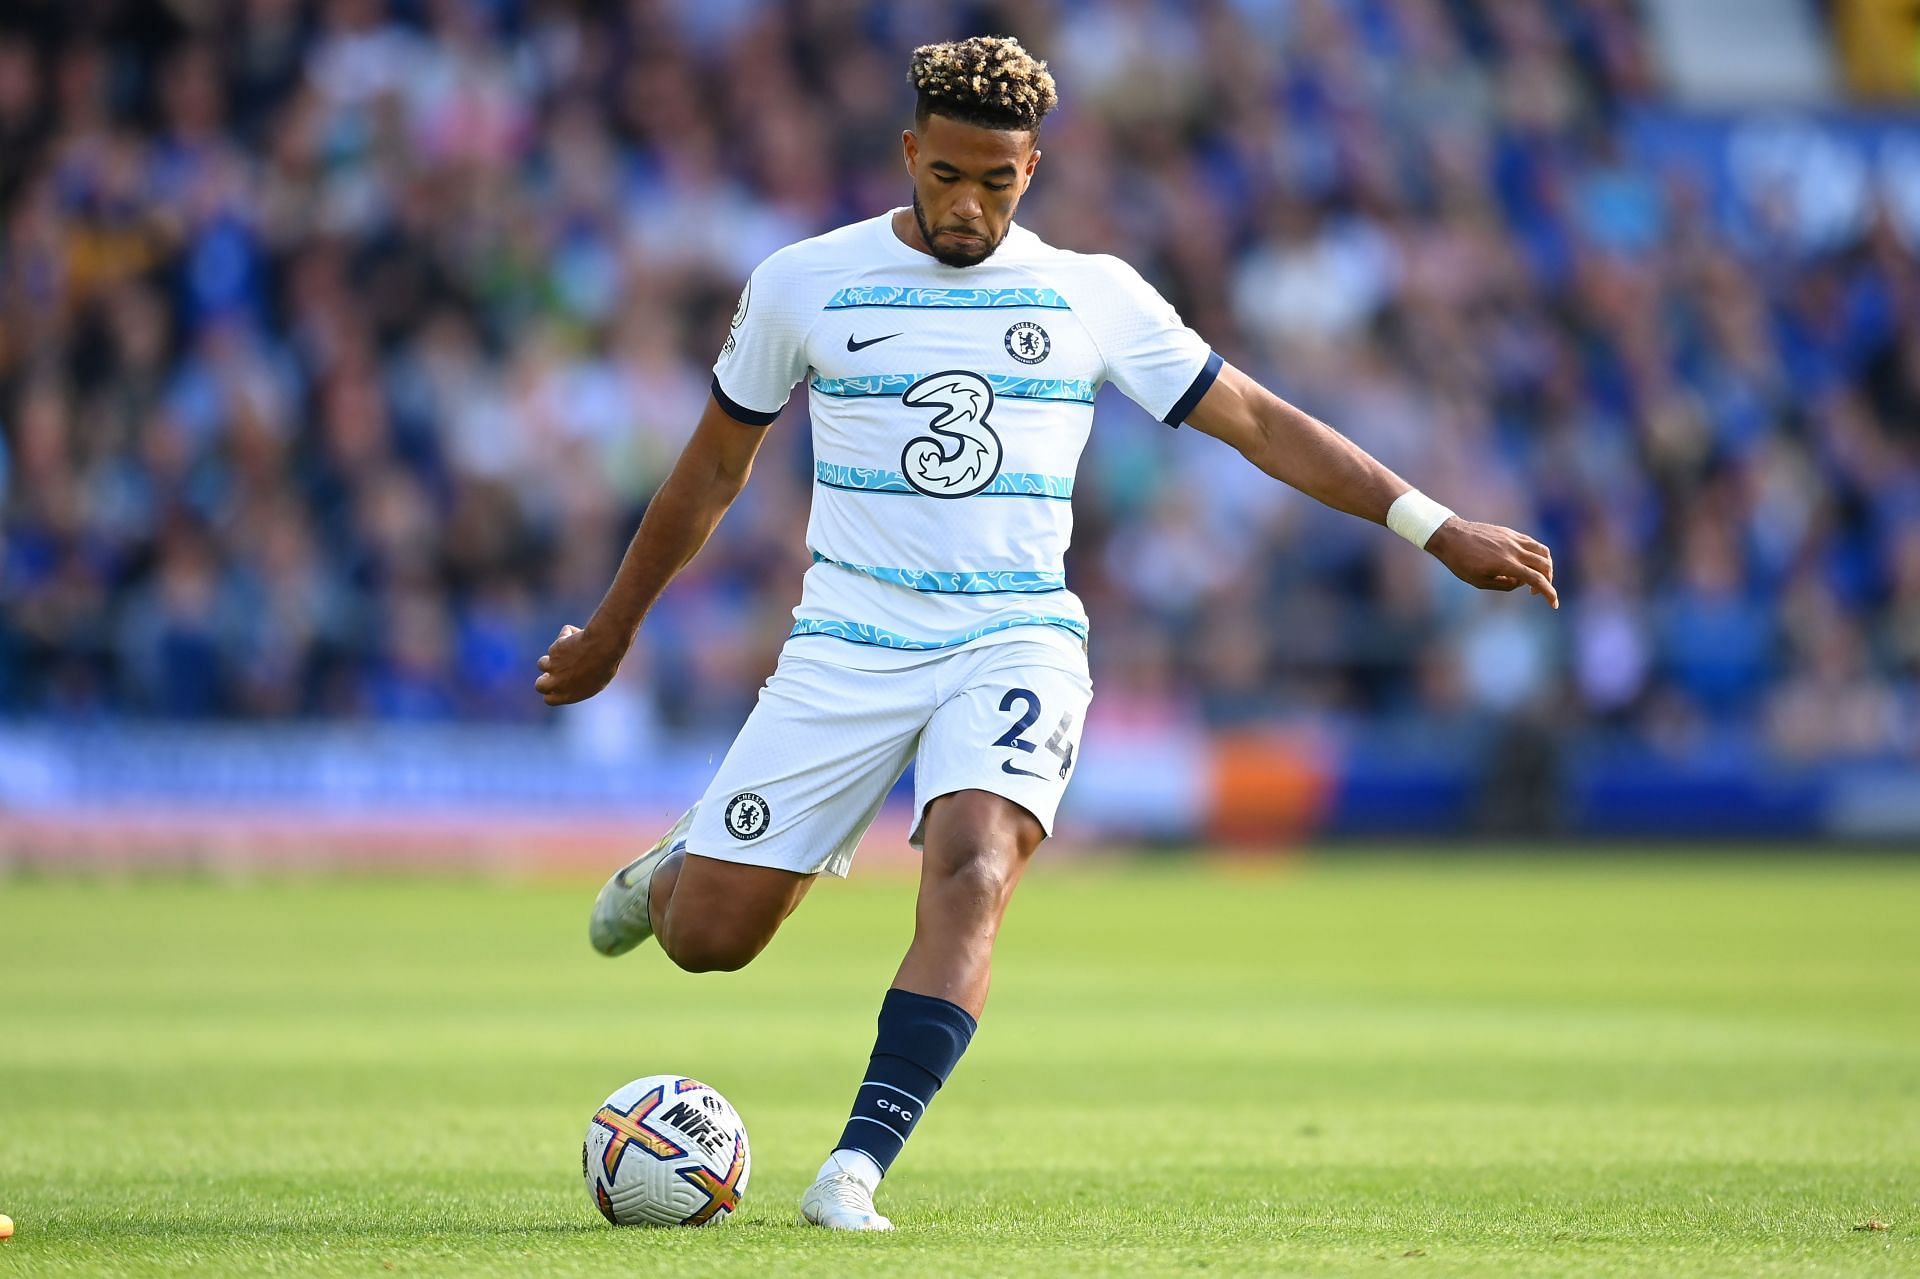 Reece James is one of the best wing-backs in the Premier League